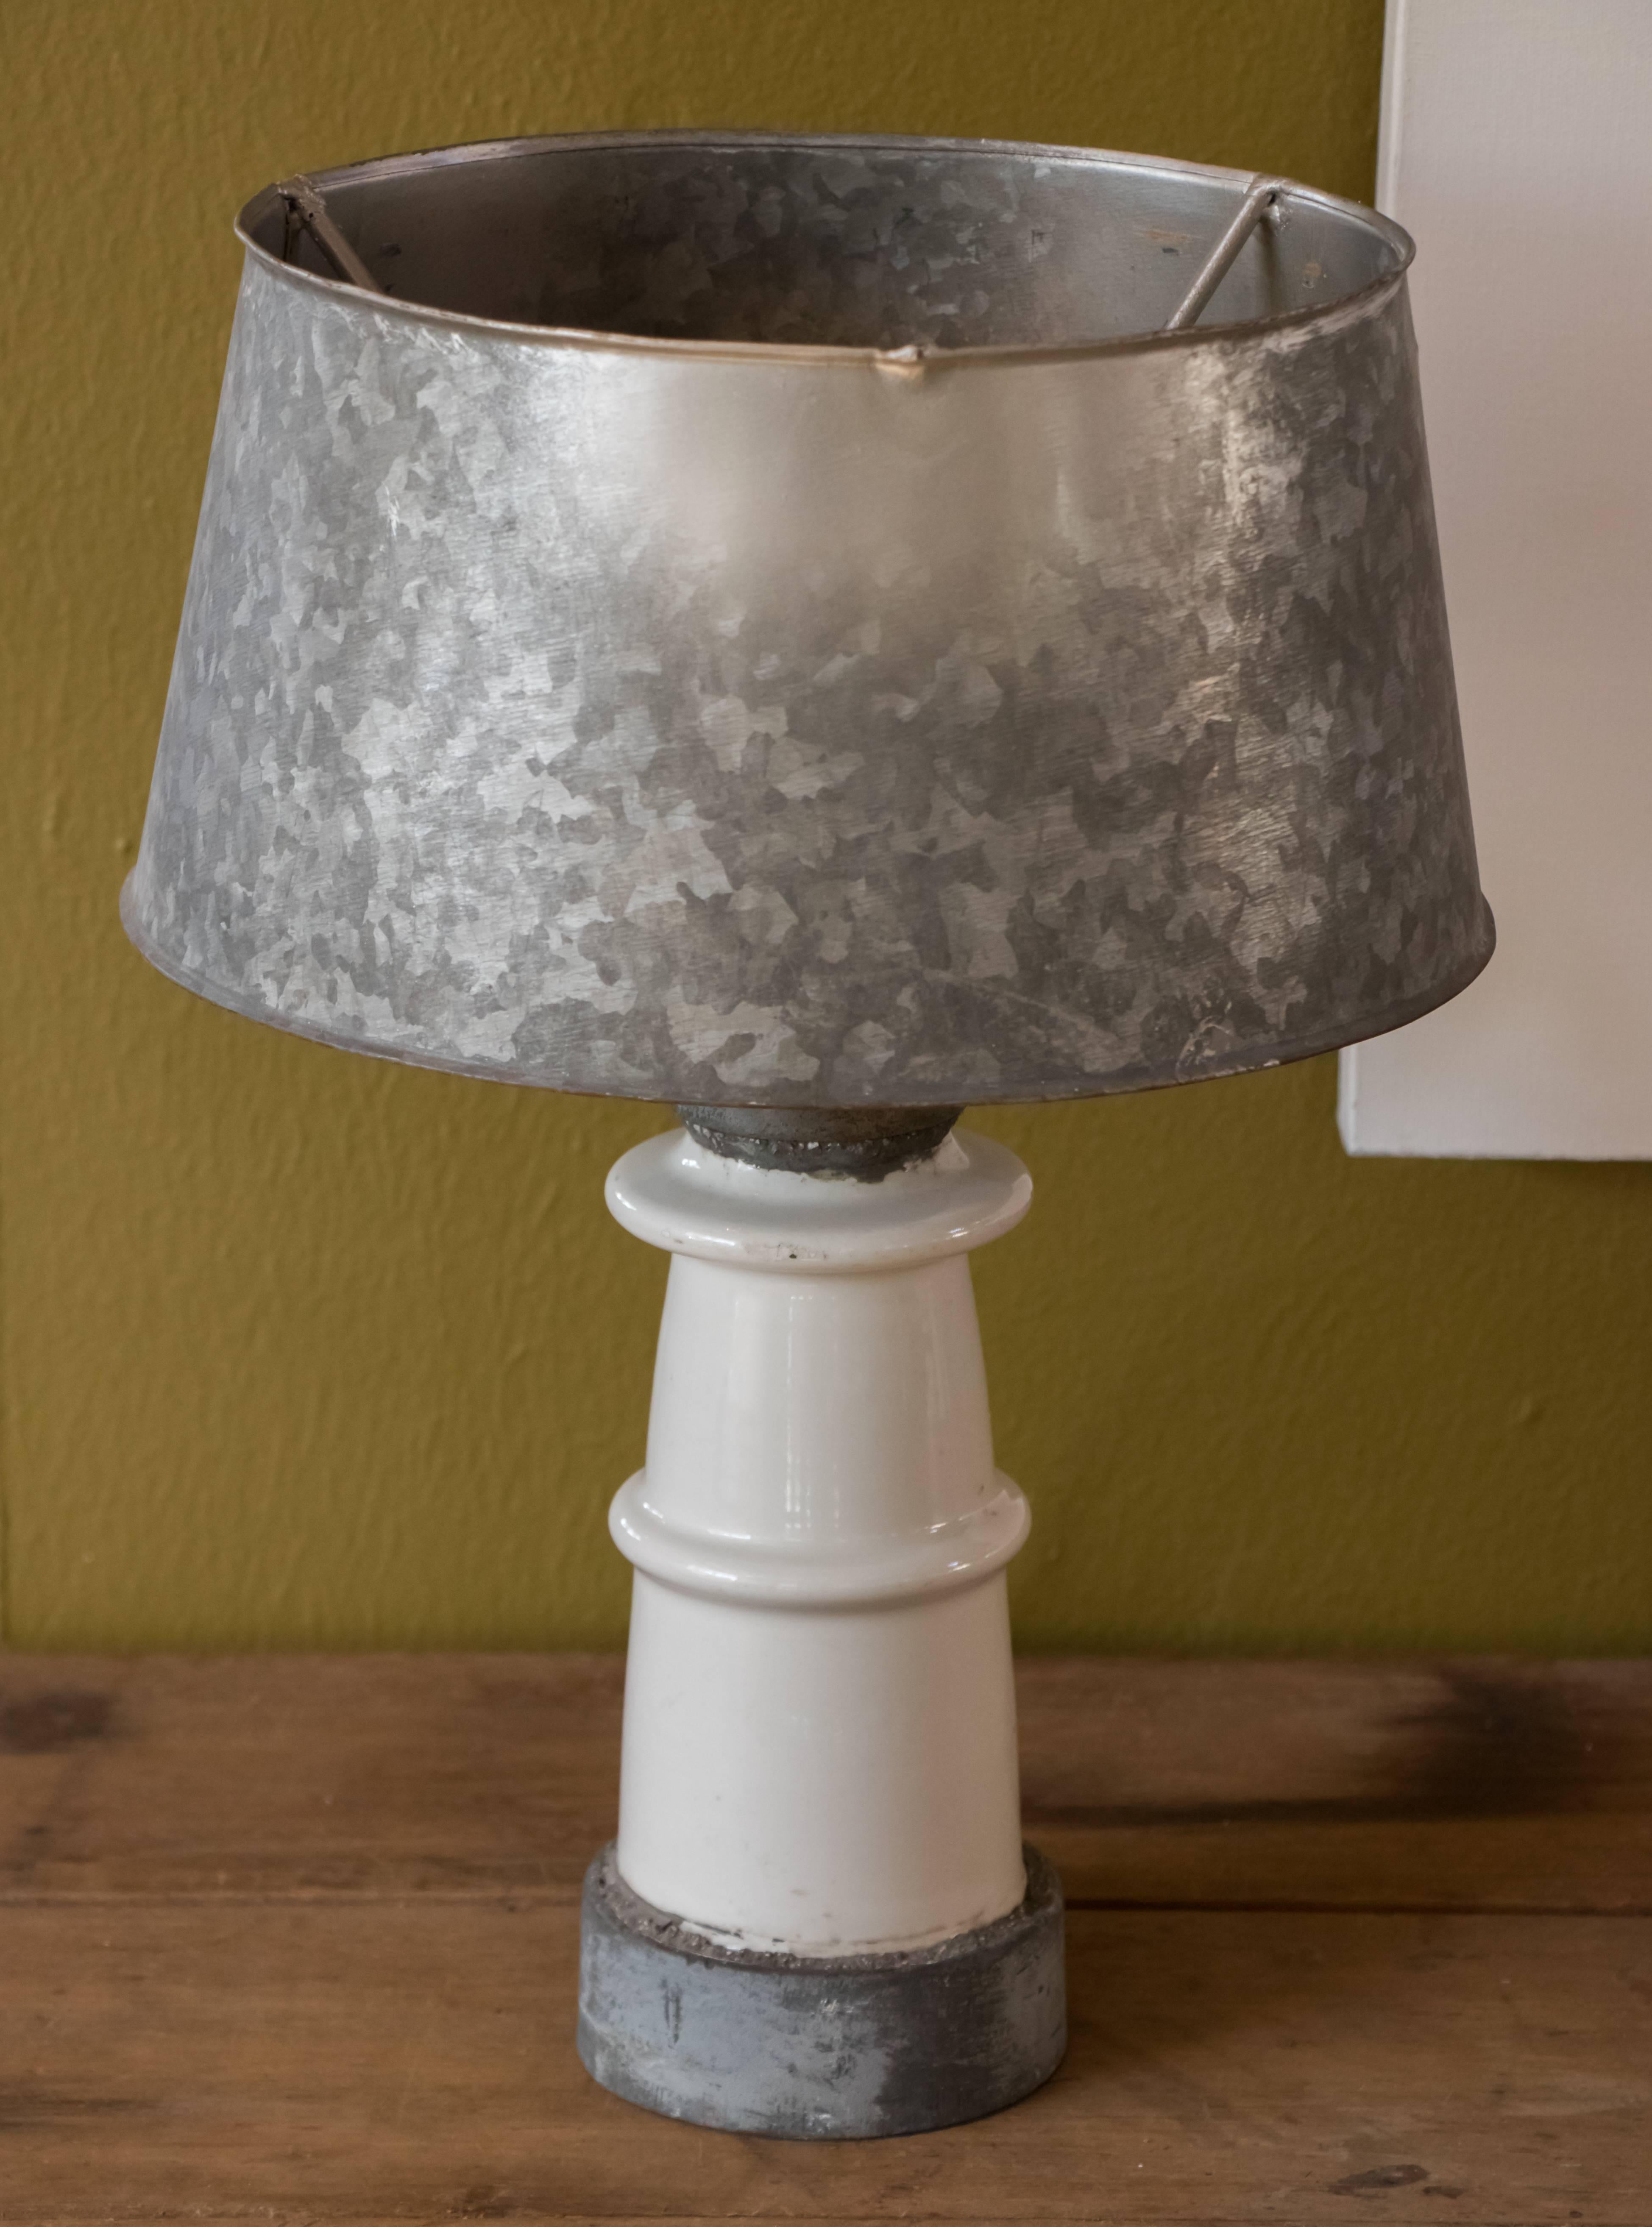 One of a kind pair of heavy glazed white ceramic table lamps with grey galvanized bases and shades. Newly French wired for use in the USA from vintage parts with all UL listed wiring components. Phenolic sockets and brown cotton twist cord with felt